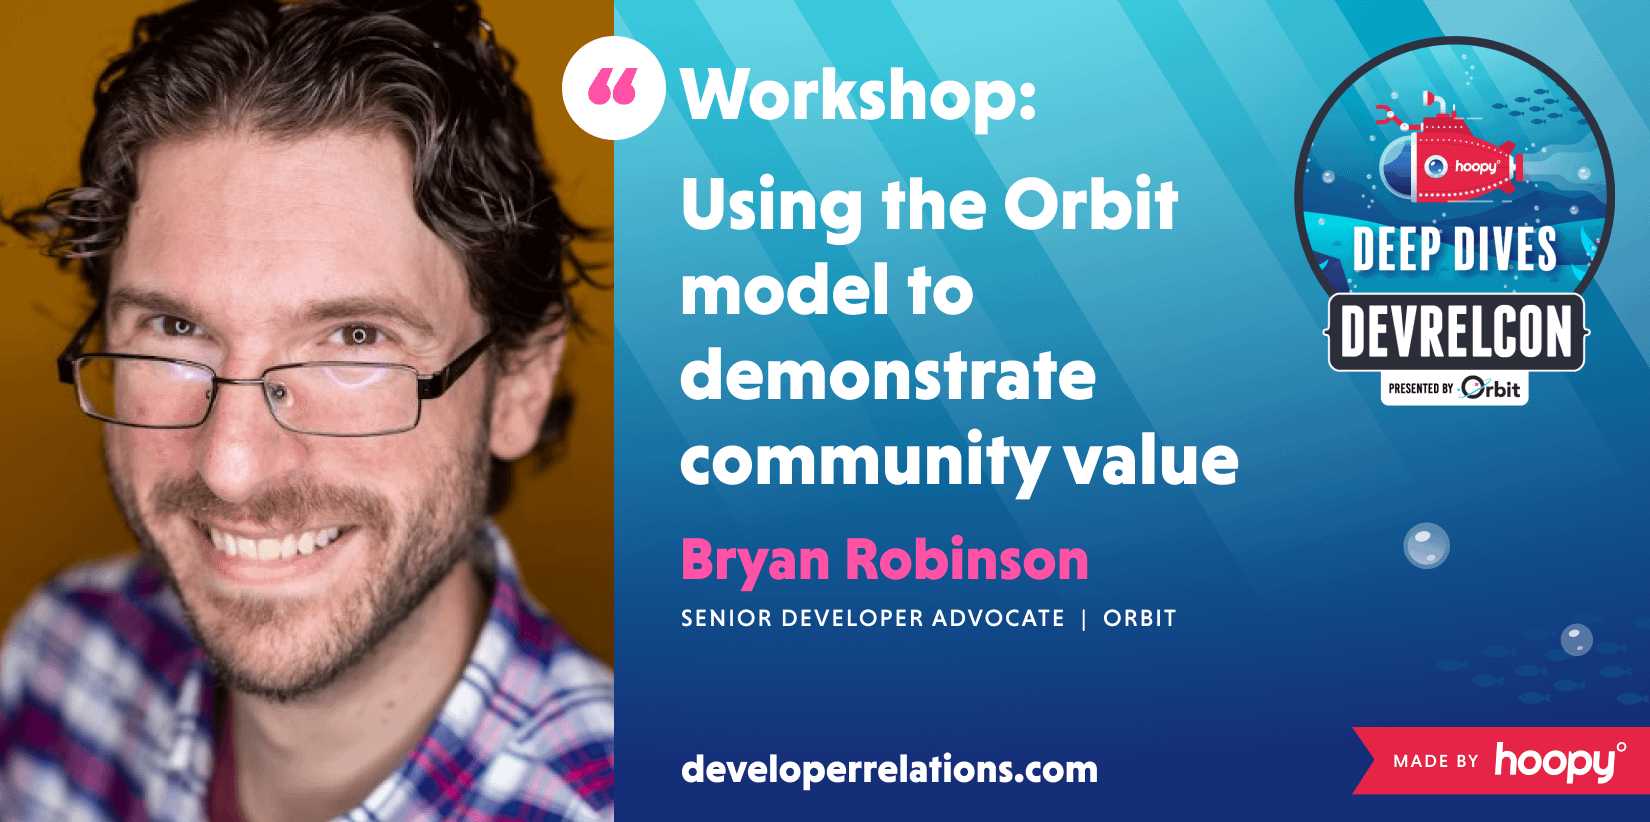 The Orbit model is a way of measuring and understanding communities. And it also provides a framework for thinking about how to build your community. In this workshop from DevRelCon Deep Dives, Orbit's Bryan Robinson teaches the recently expanded Orbit model and provides practical guidance on how to apply it to your developer community.